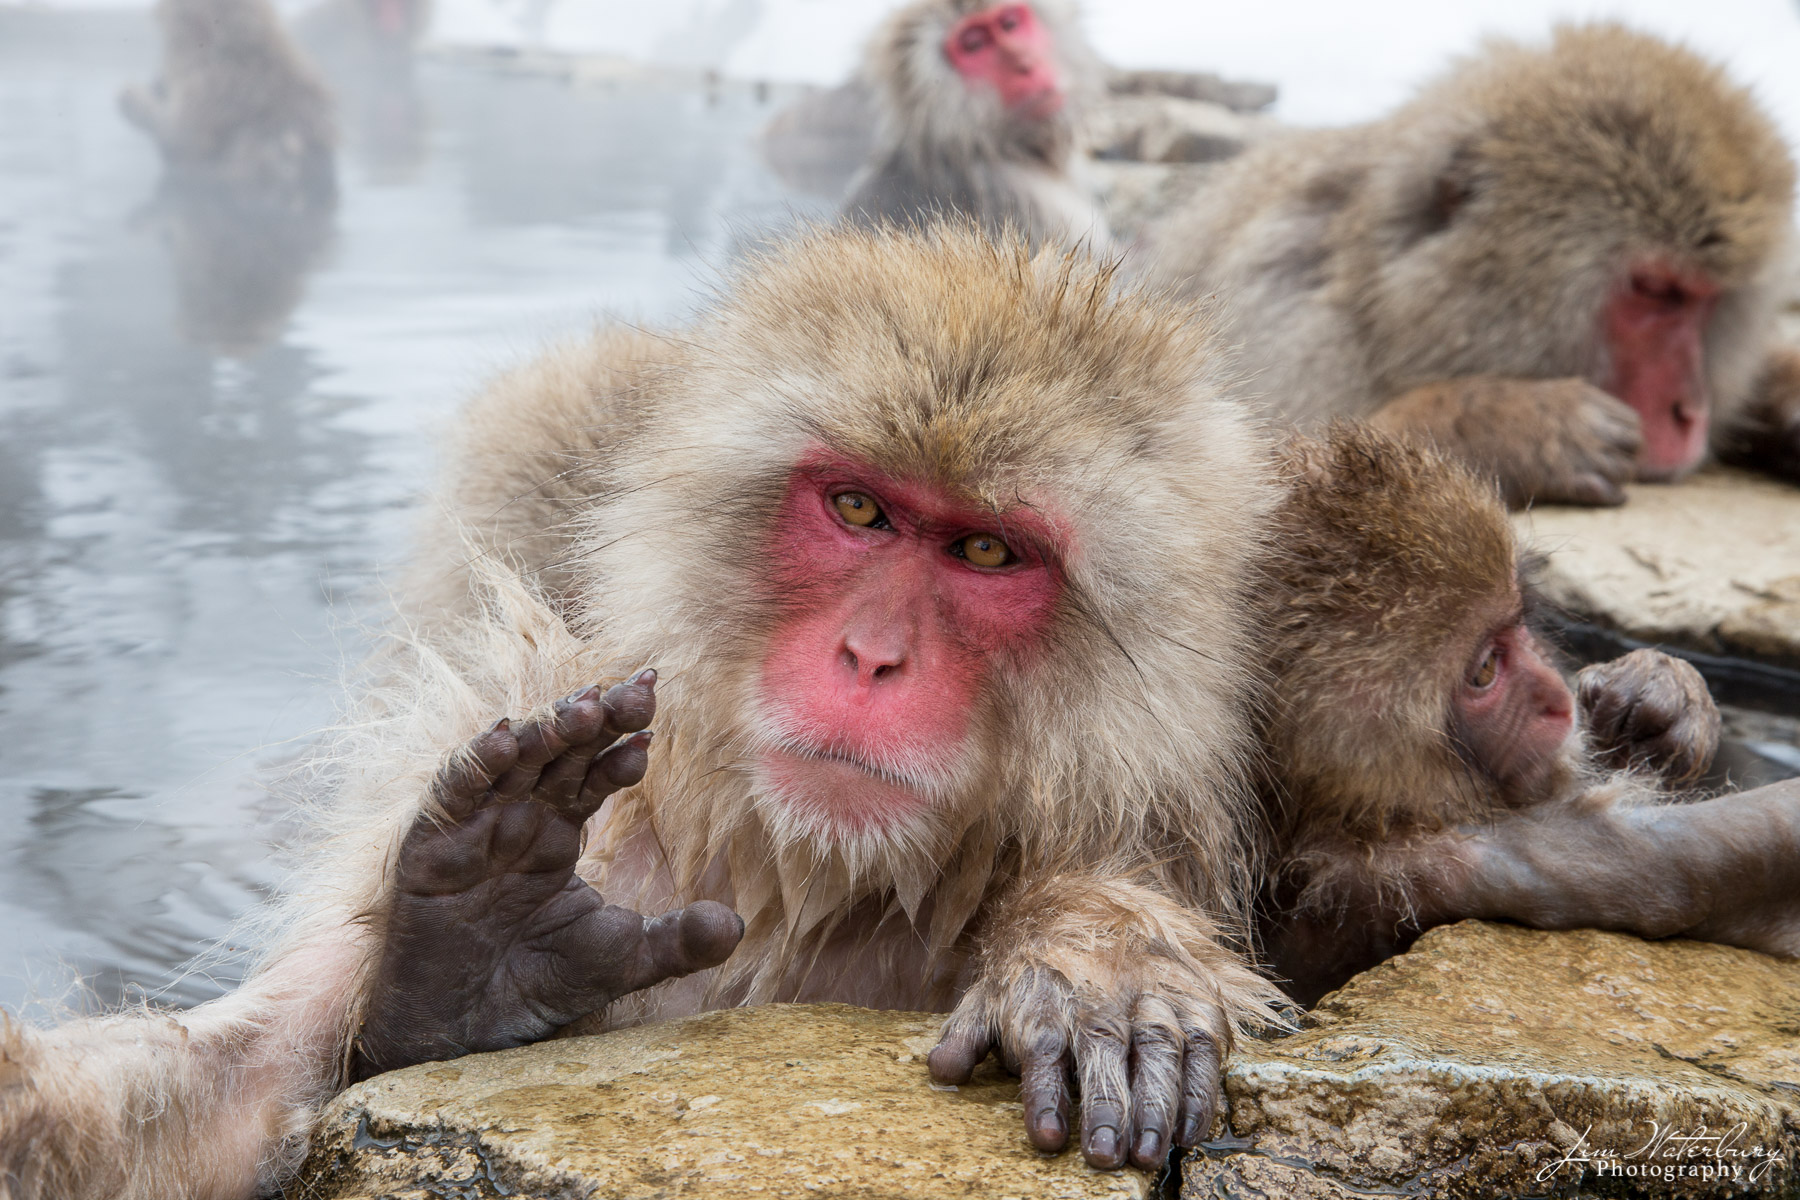 A mature Japanese "snow monkey" or "macaque", the northern-most living primate on earth, waves from a hot spring in Yudanaka...